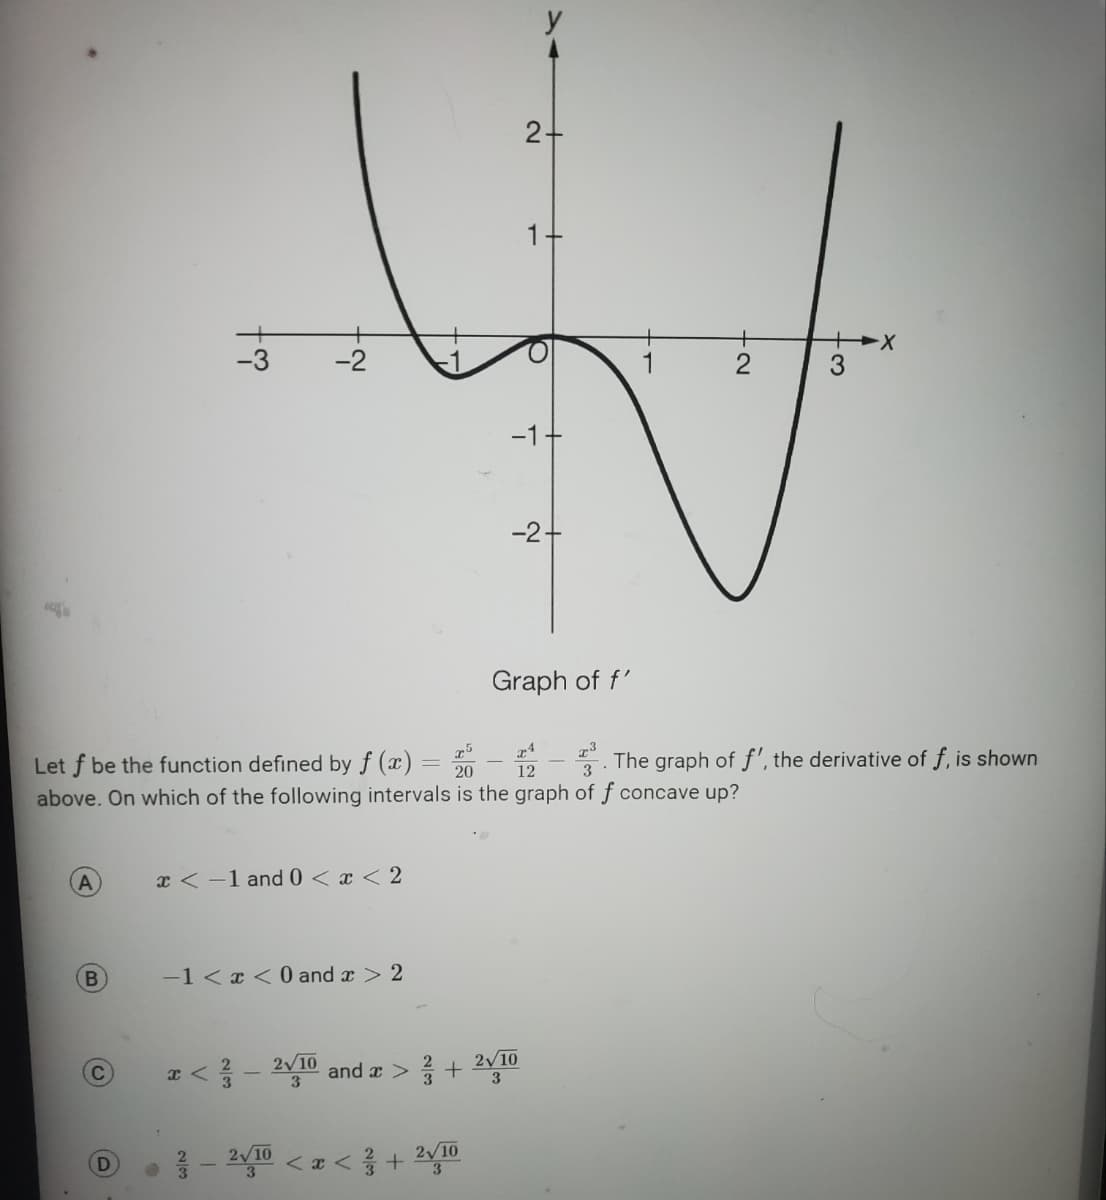 A
B
D
S
x < -1 and 0 < x < 2
cot
x <
XA
Let f be the function defined by f(x) = 200
above. On which of the following intervals is the graph of f concave up?
12
3
-1<x<0 and x > 2
2/2
~
3
-
210 and x > +
2-2√/10 < x < ²/3 + 2√/10
3
2+
-1
-2+
Graph of f'
2√10
3
N.
3
- The graph of f', the derivative of f, is shown